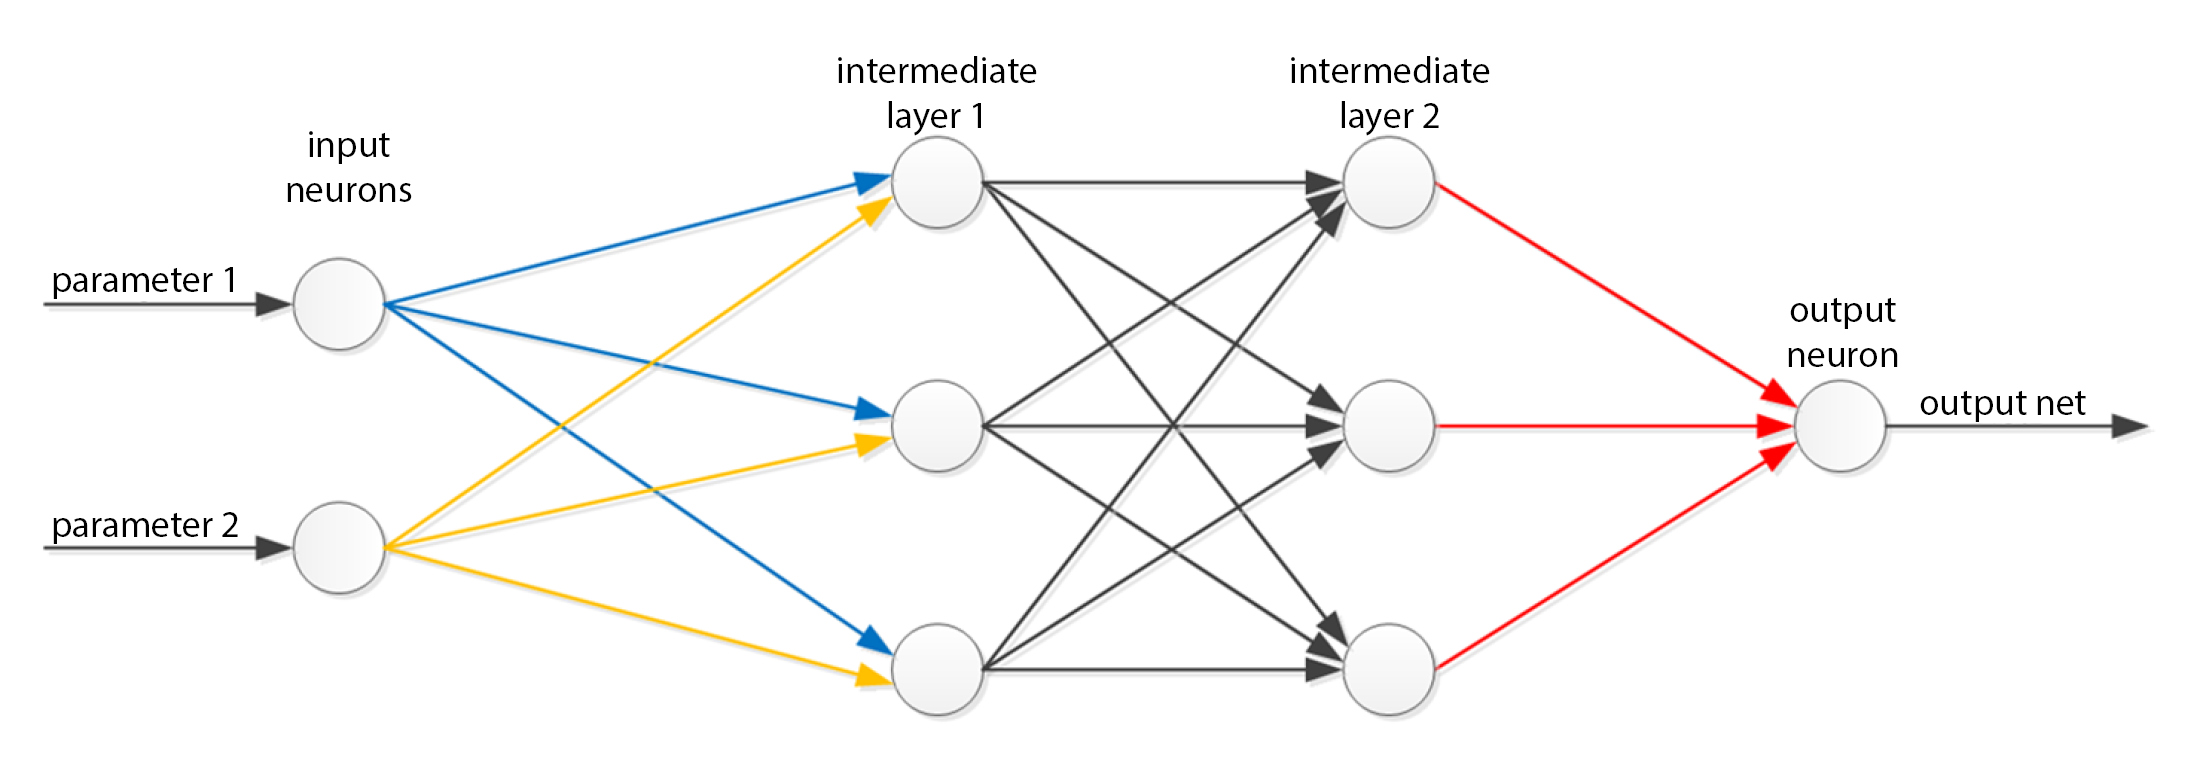 Glatt in the joint project "ASTEROID-WS": Principle of artificial neural networks